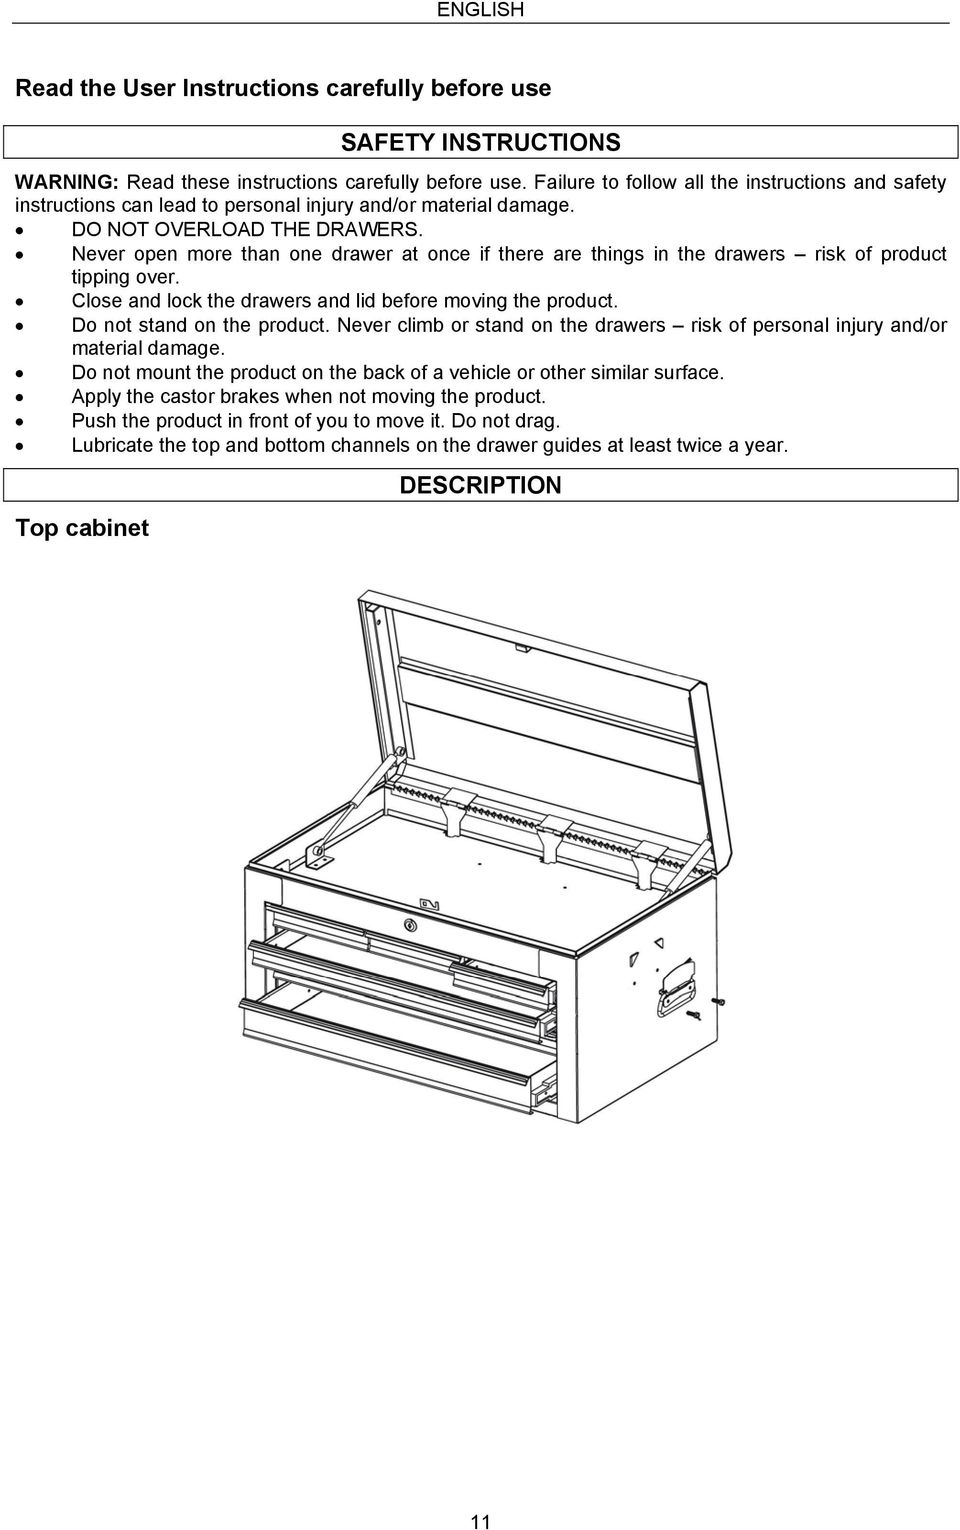 Never open more than one drawer at once if there are things in the drawers risk of product tipping over. Close and lock the drawers and lid before moving the product. Do not stand on the product.